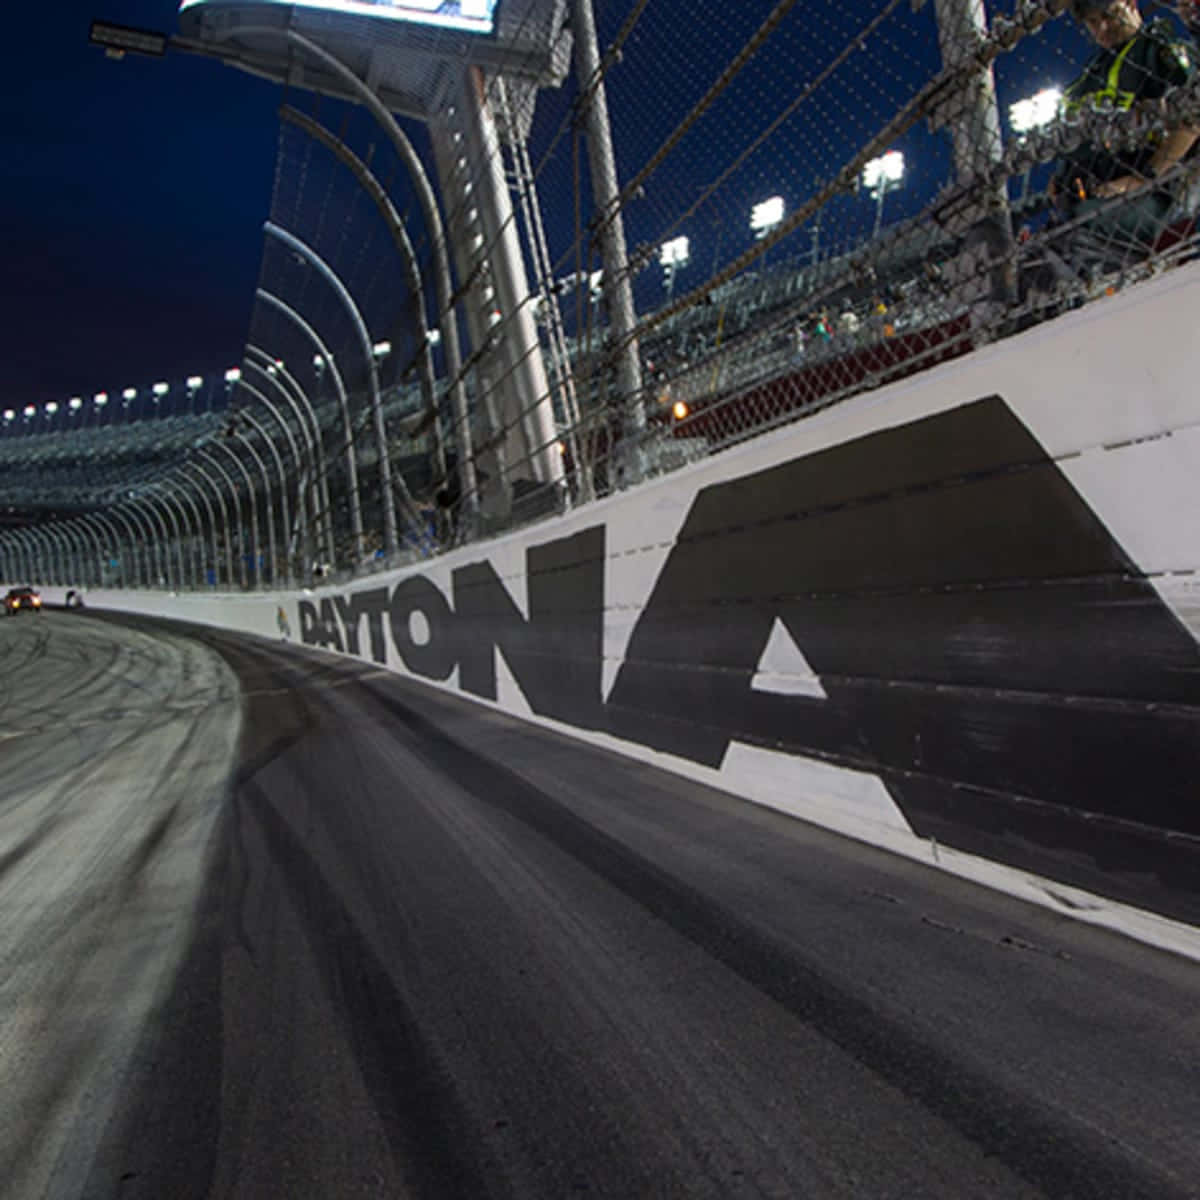 A Race Car Driving Down A Track At Night